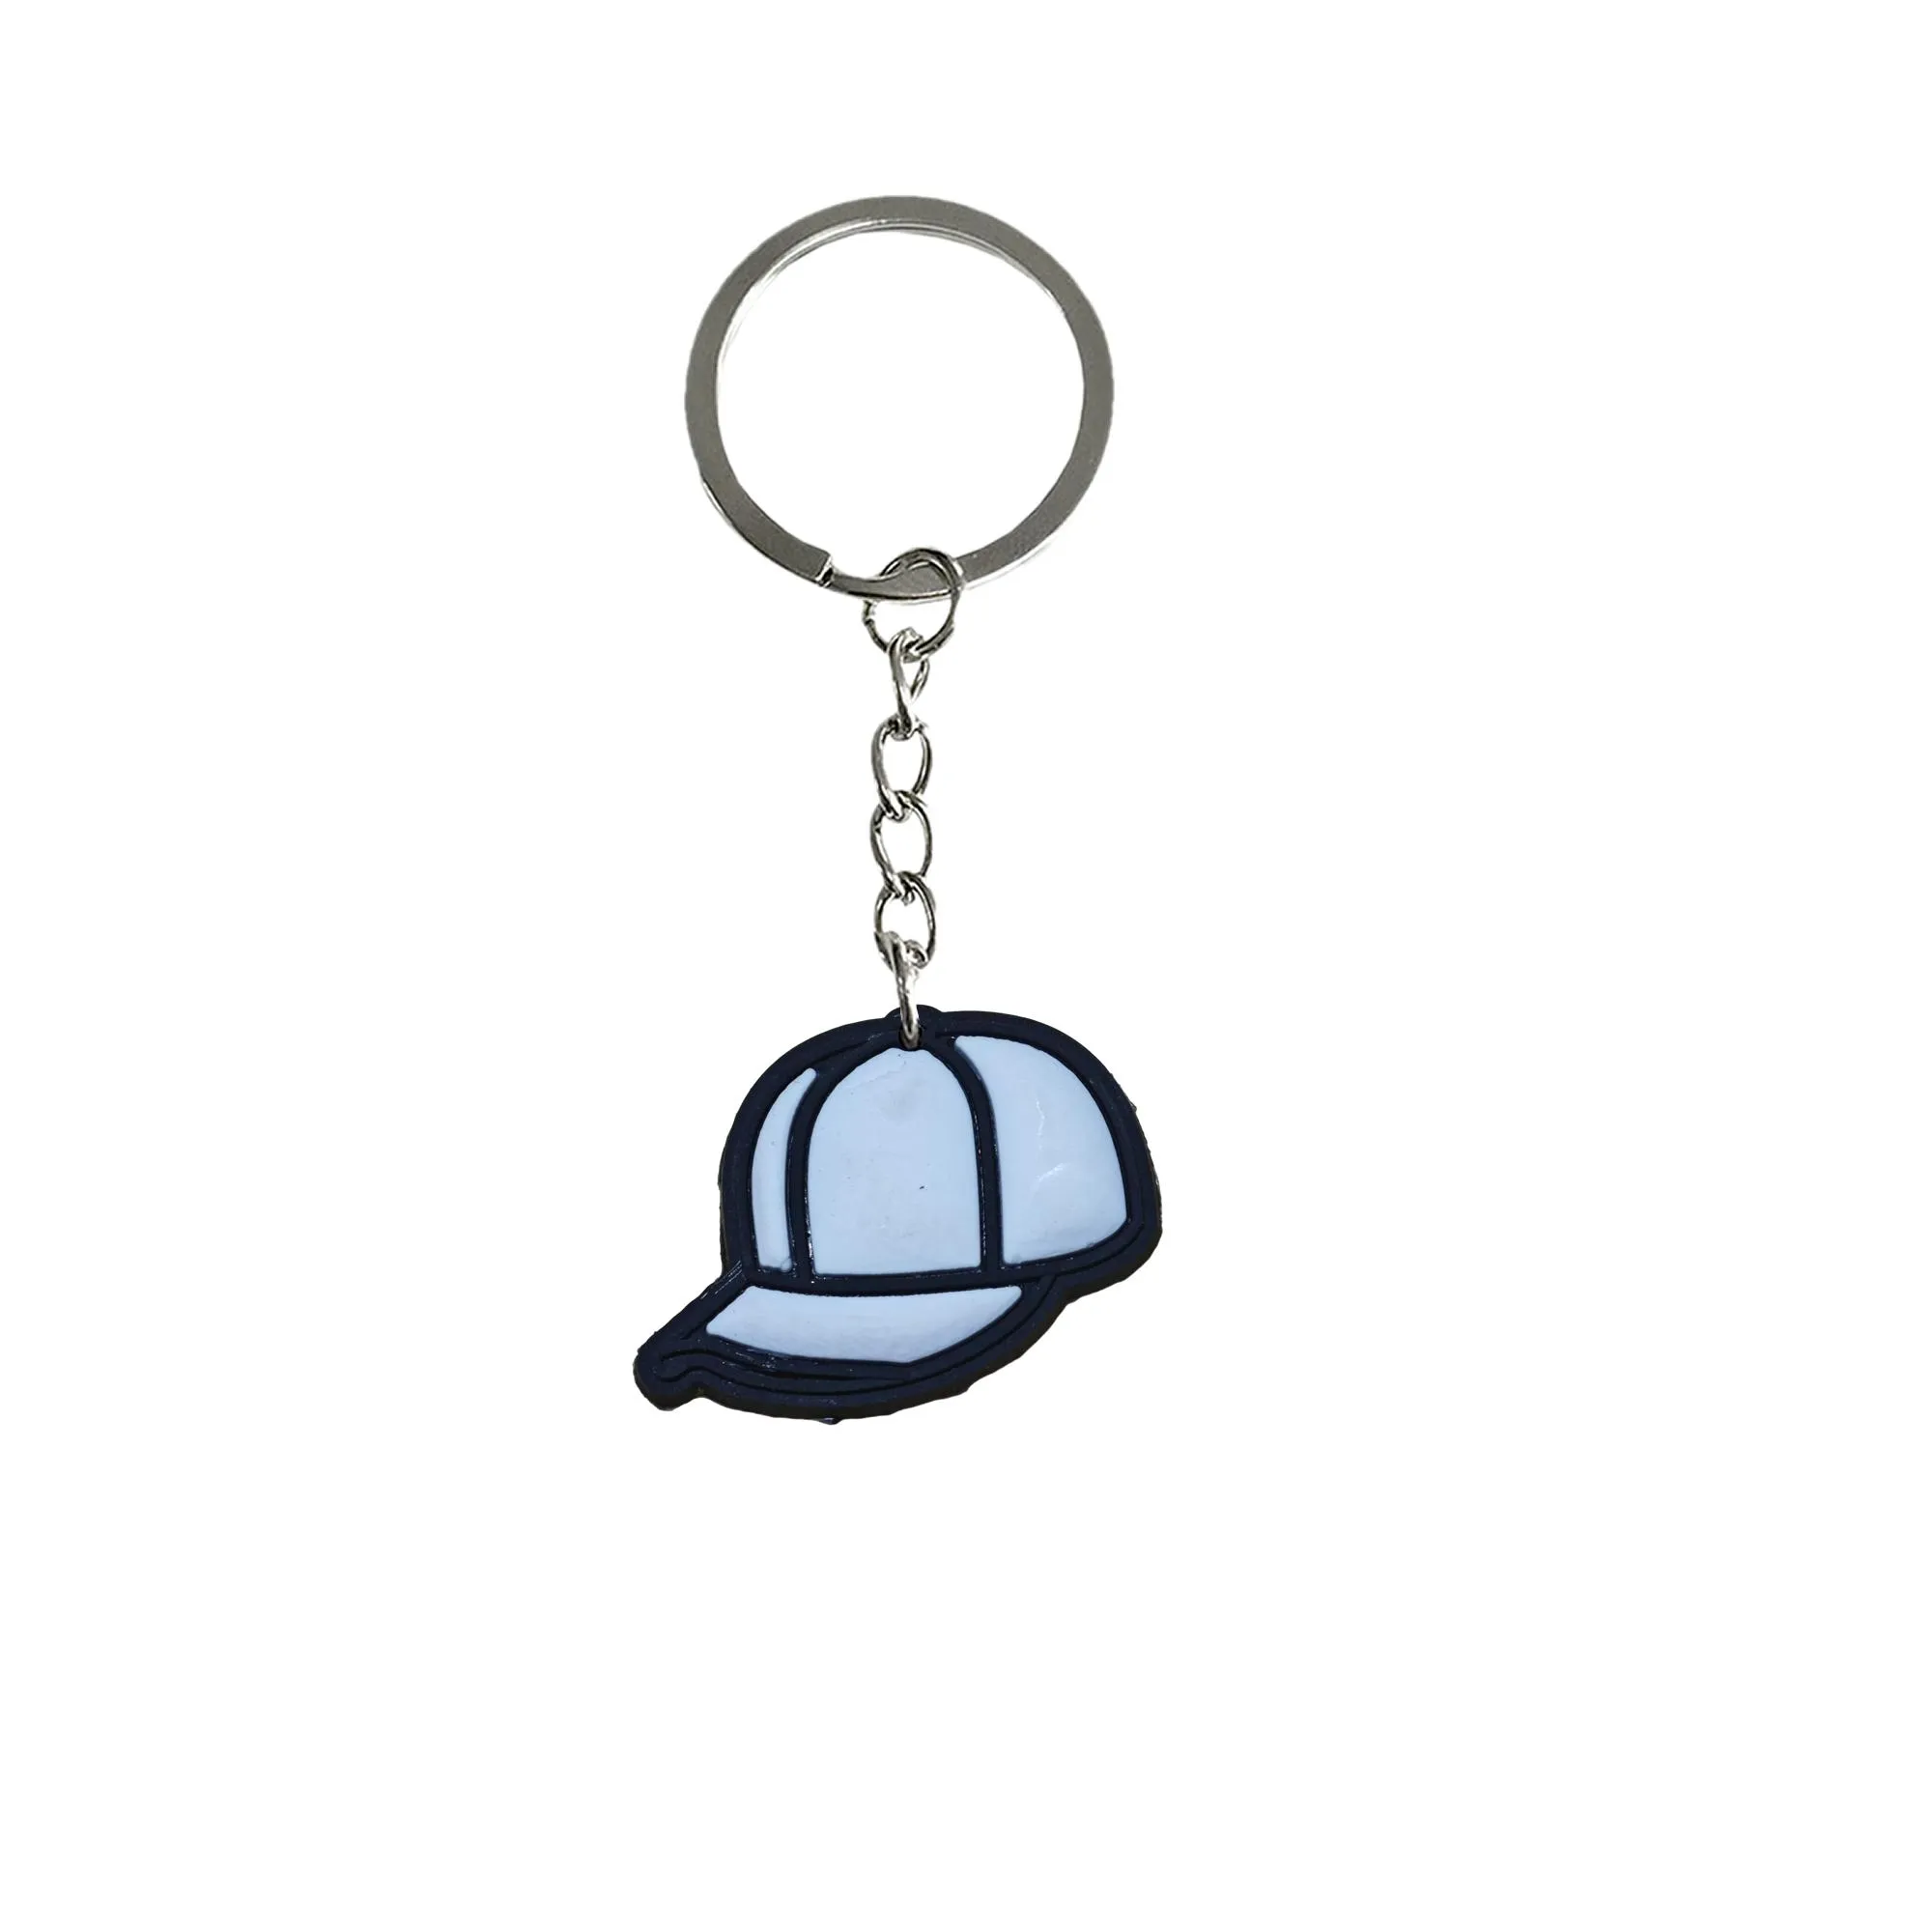 hat keychain keychains party favors key chain accessories for backpack handbag and car gift valentines day keyring men suitable schoolbag women ring bag